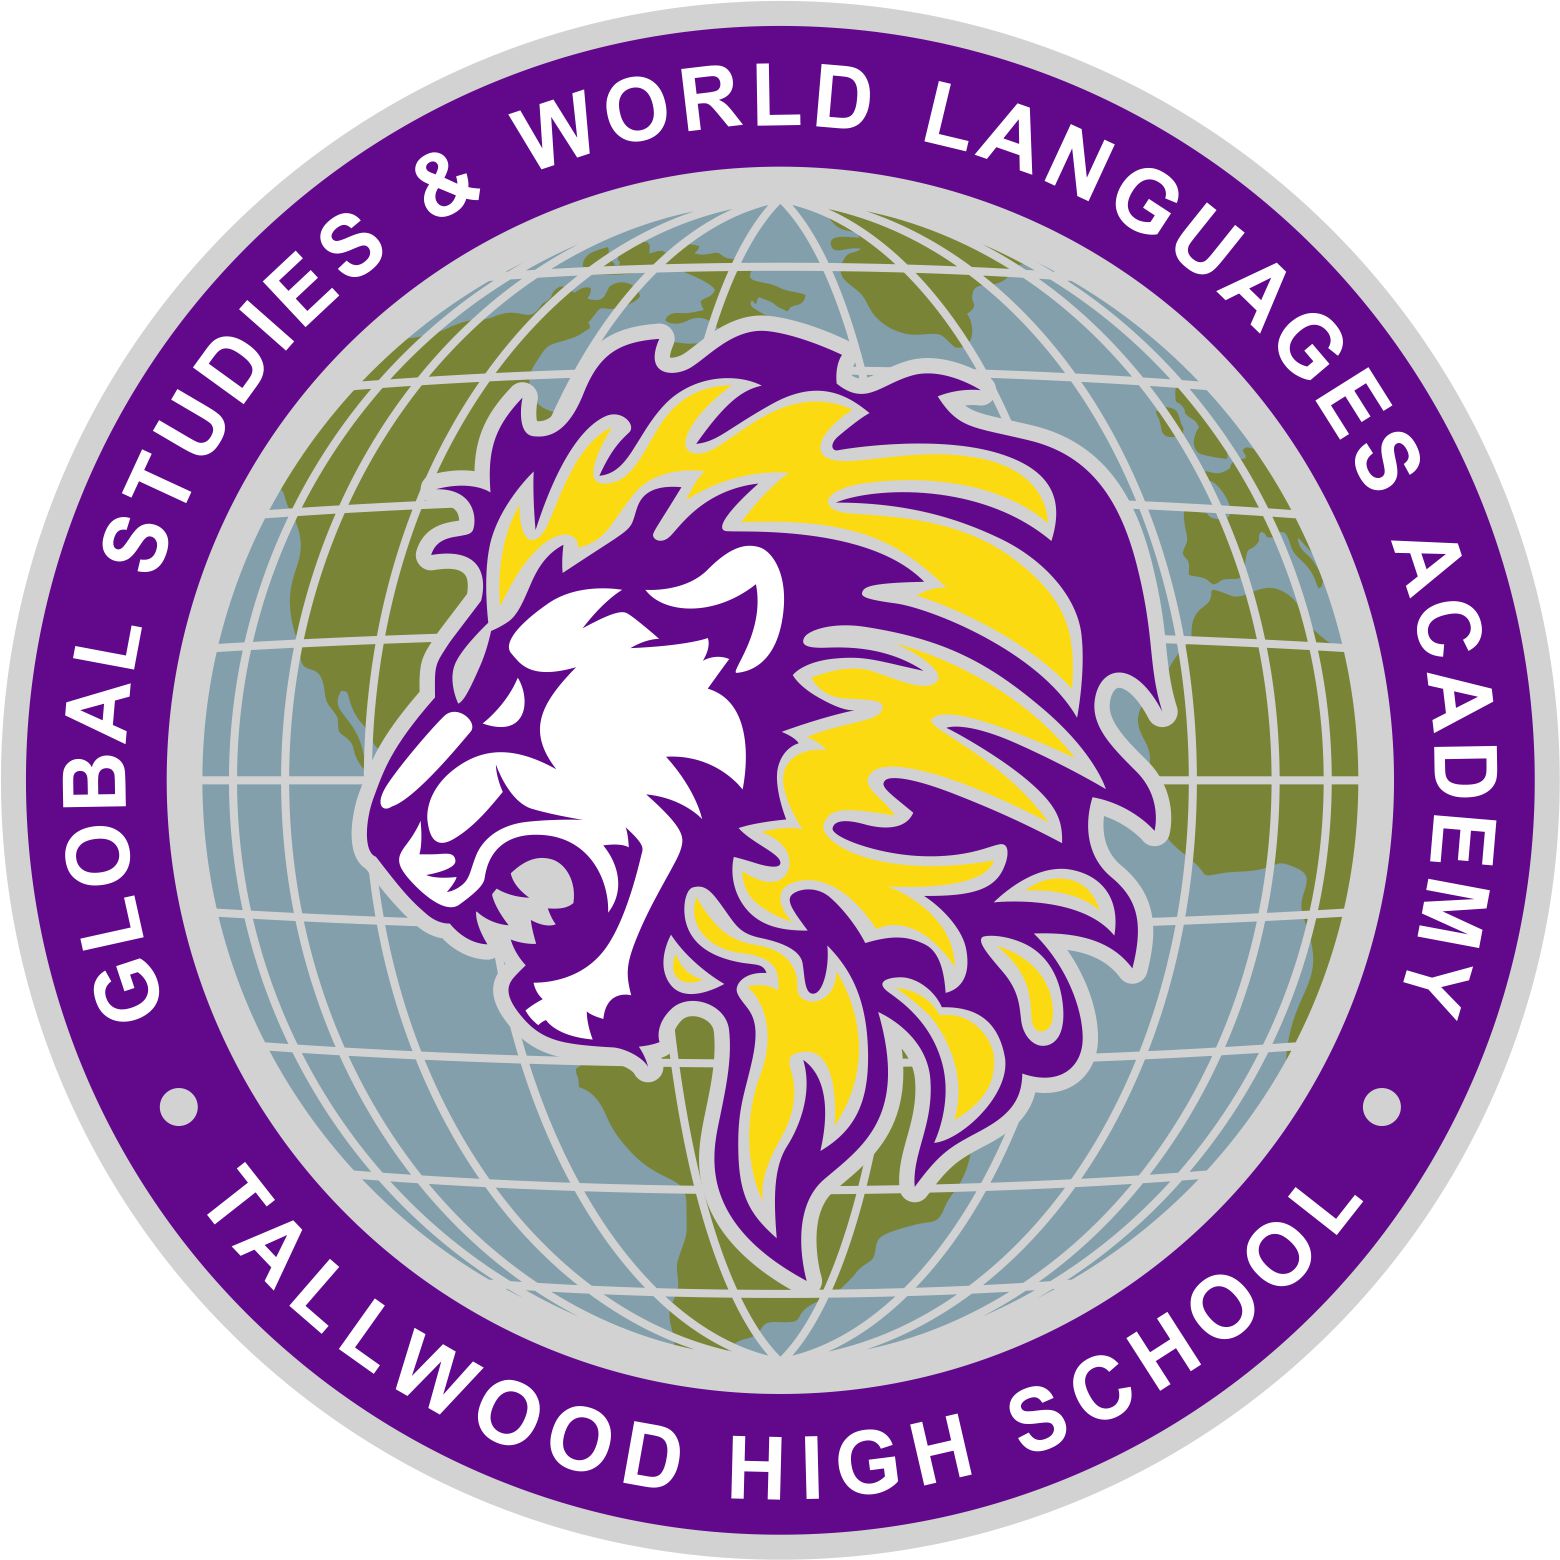 The Global Studies and World Languages Academy at Tallwood High School